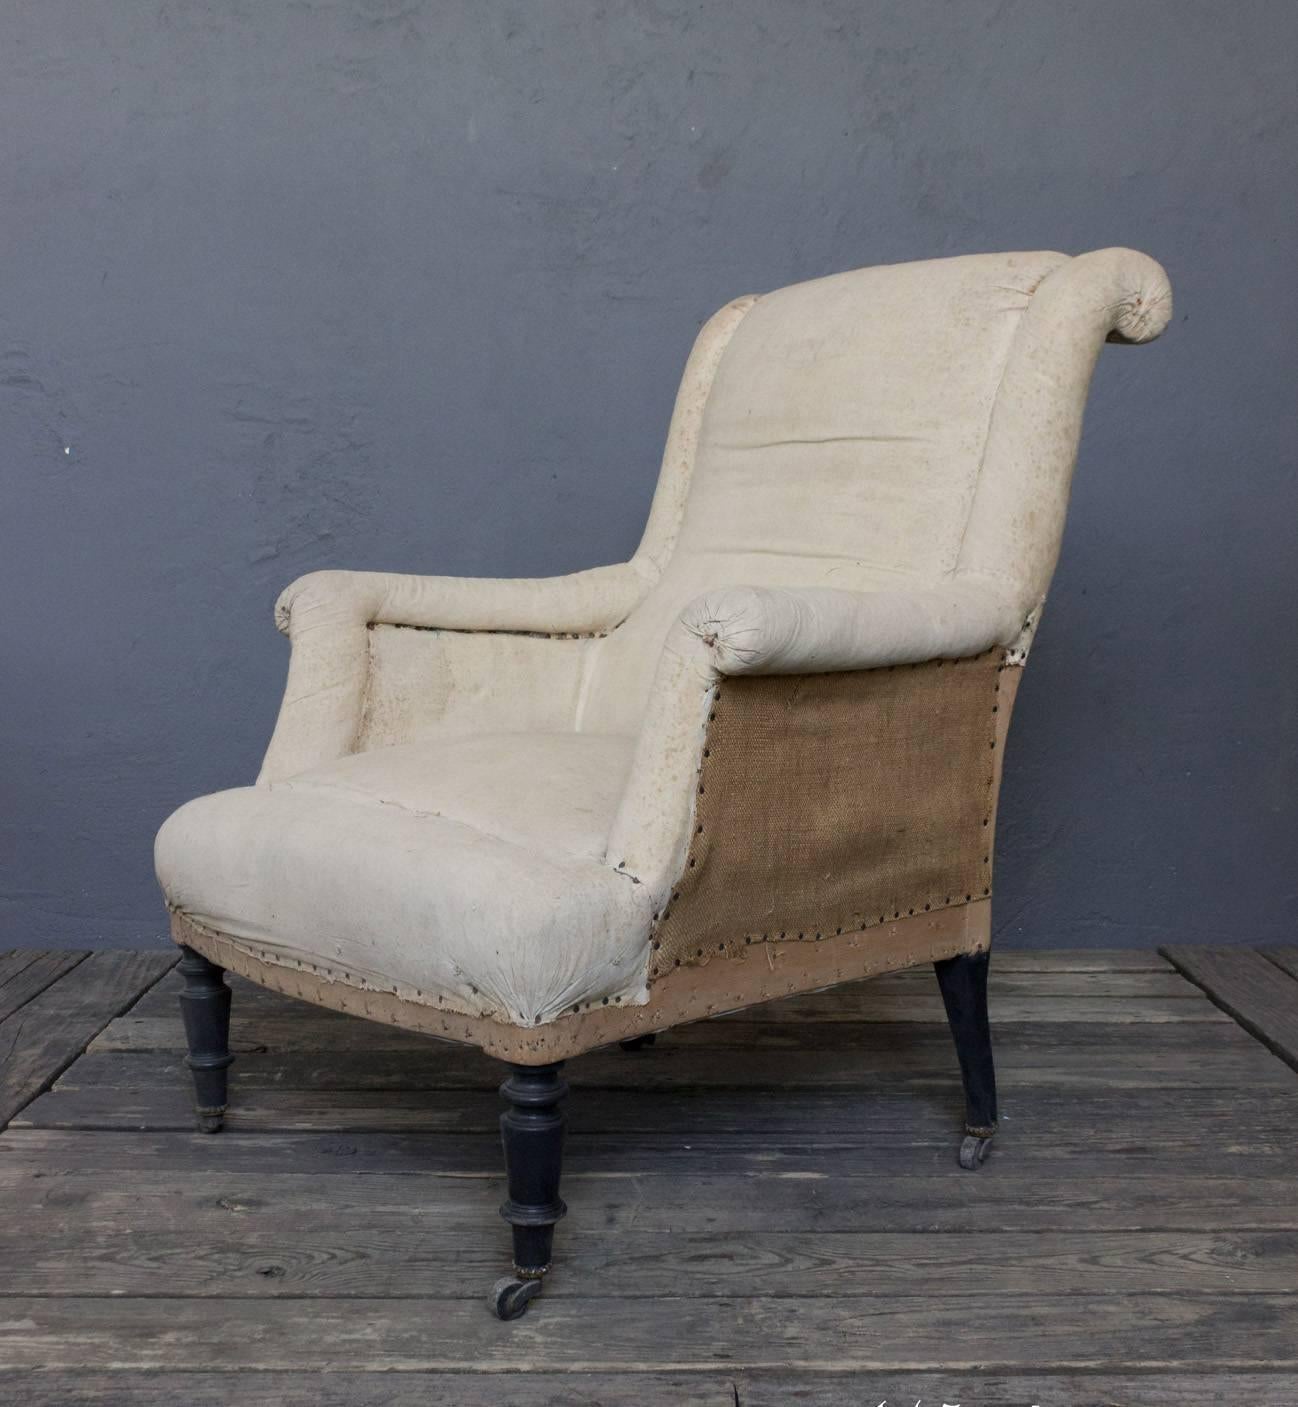 19th century pair of scrolled back armchairs with turned legs on casters.